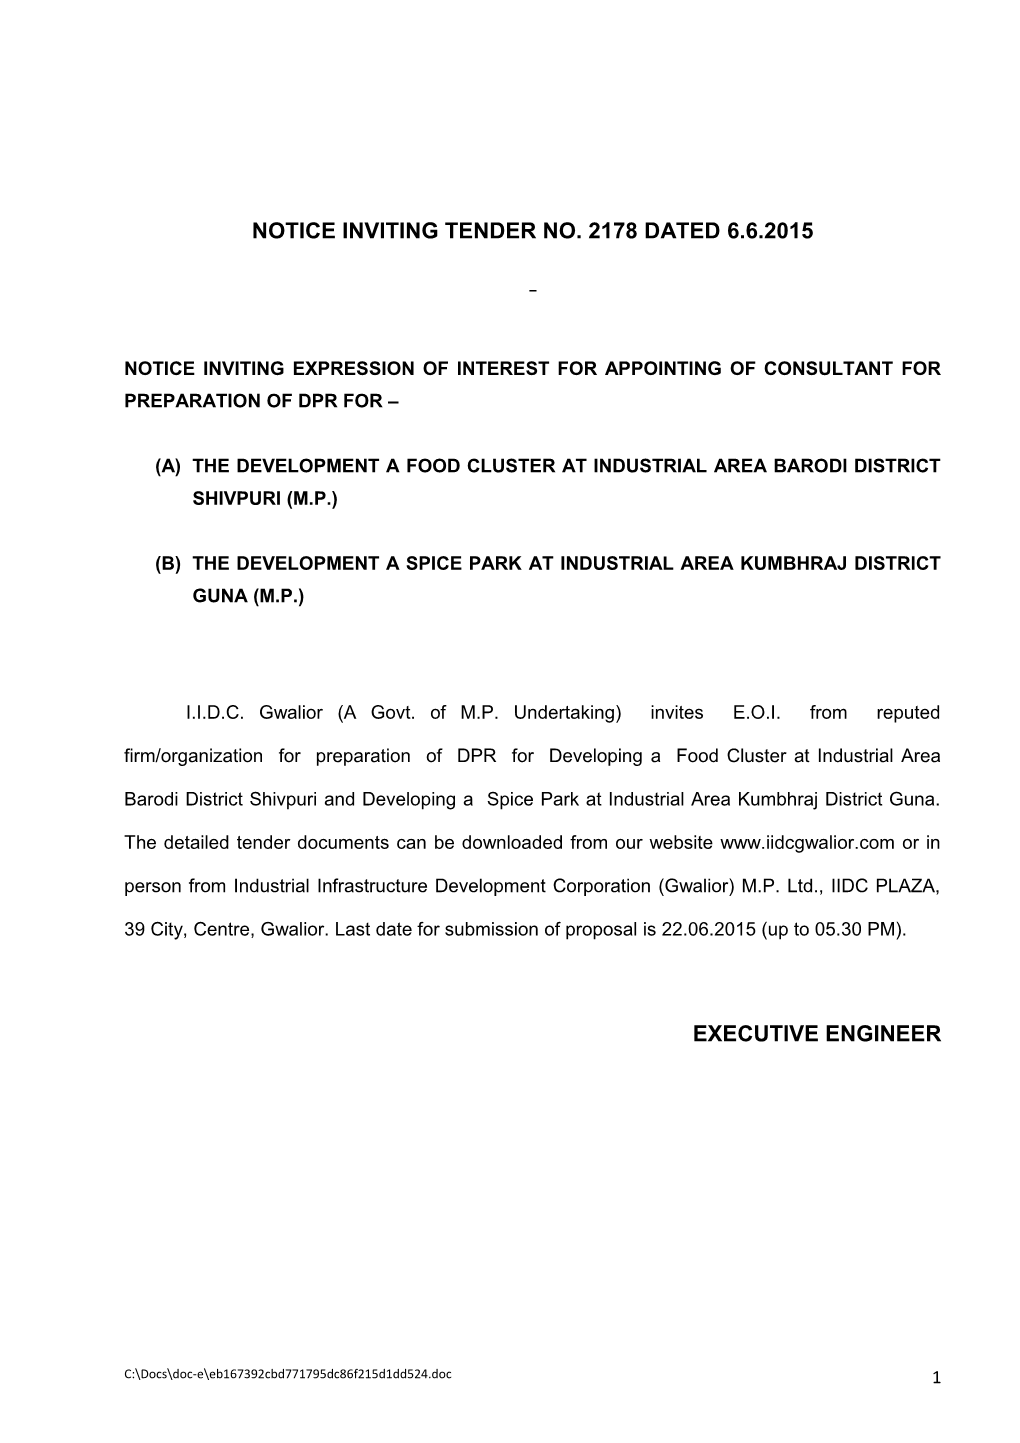 Notice Inviting Tender No. 2178 Dated 6.6.2015